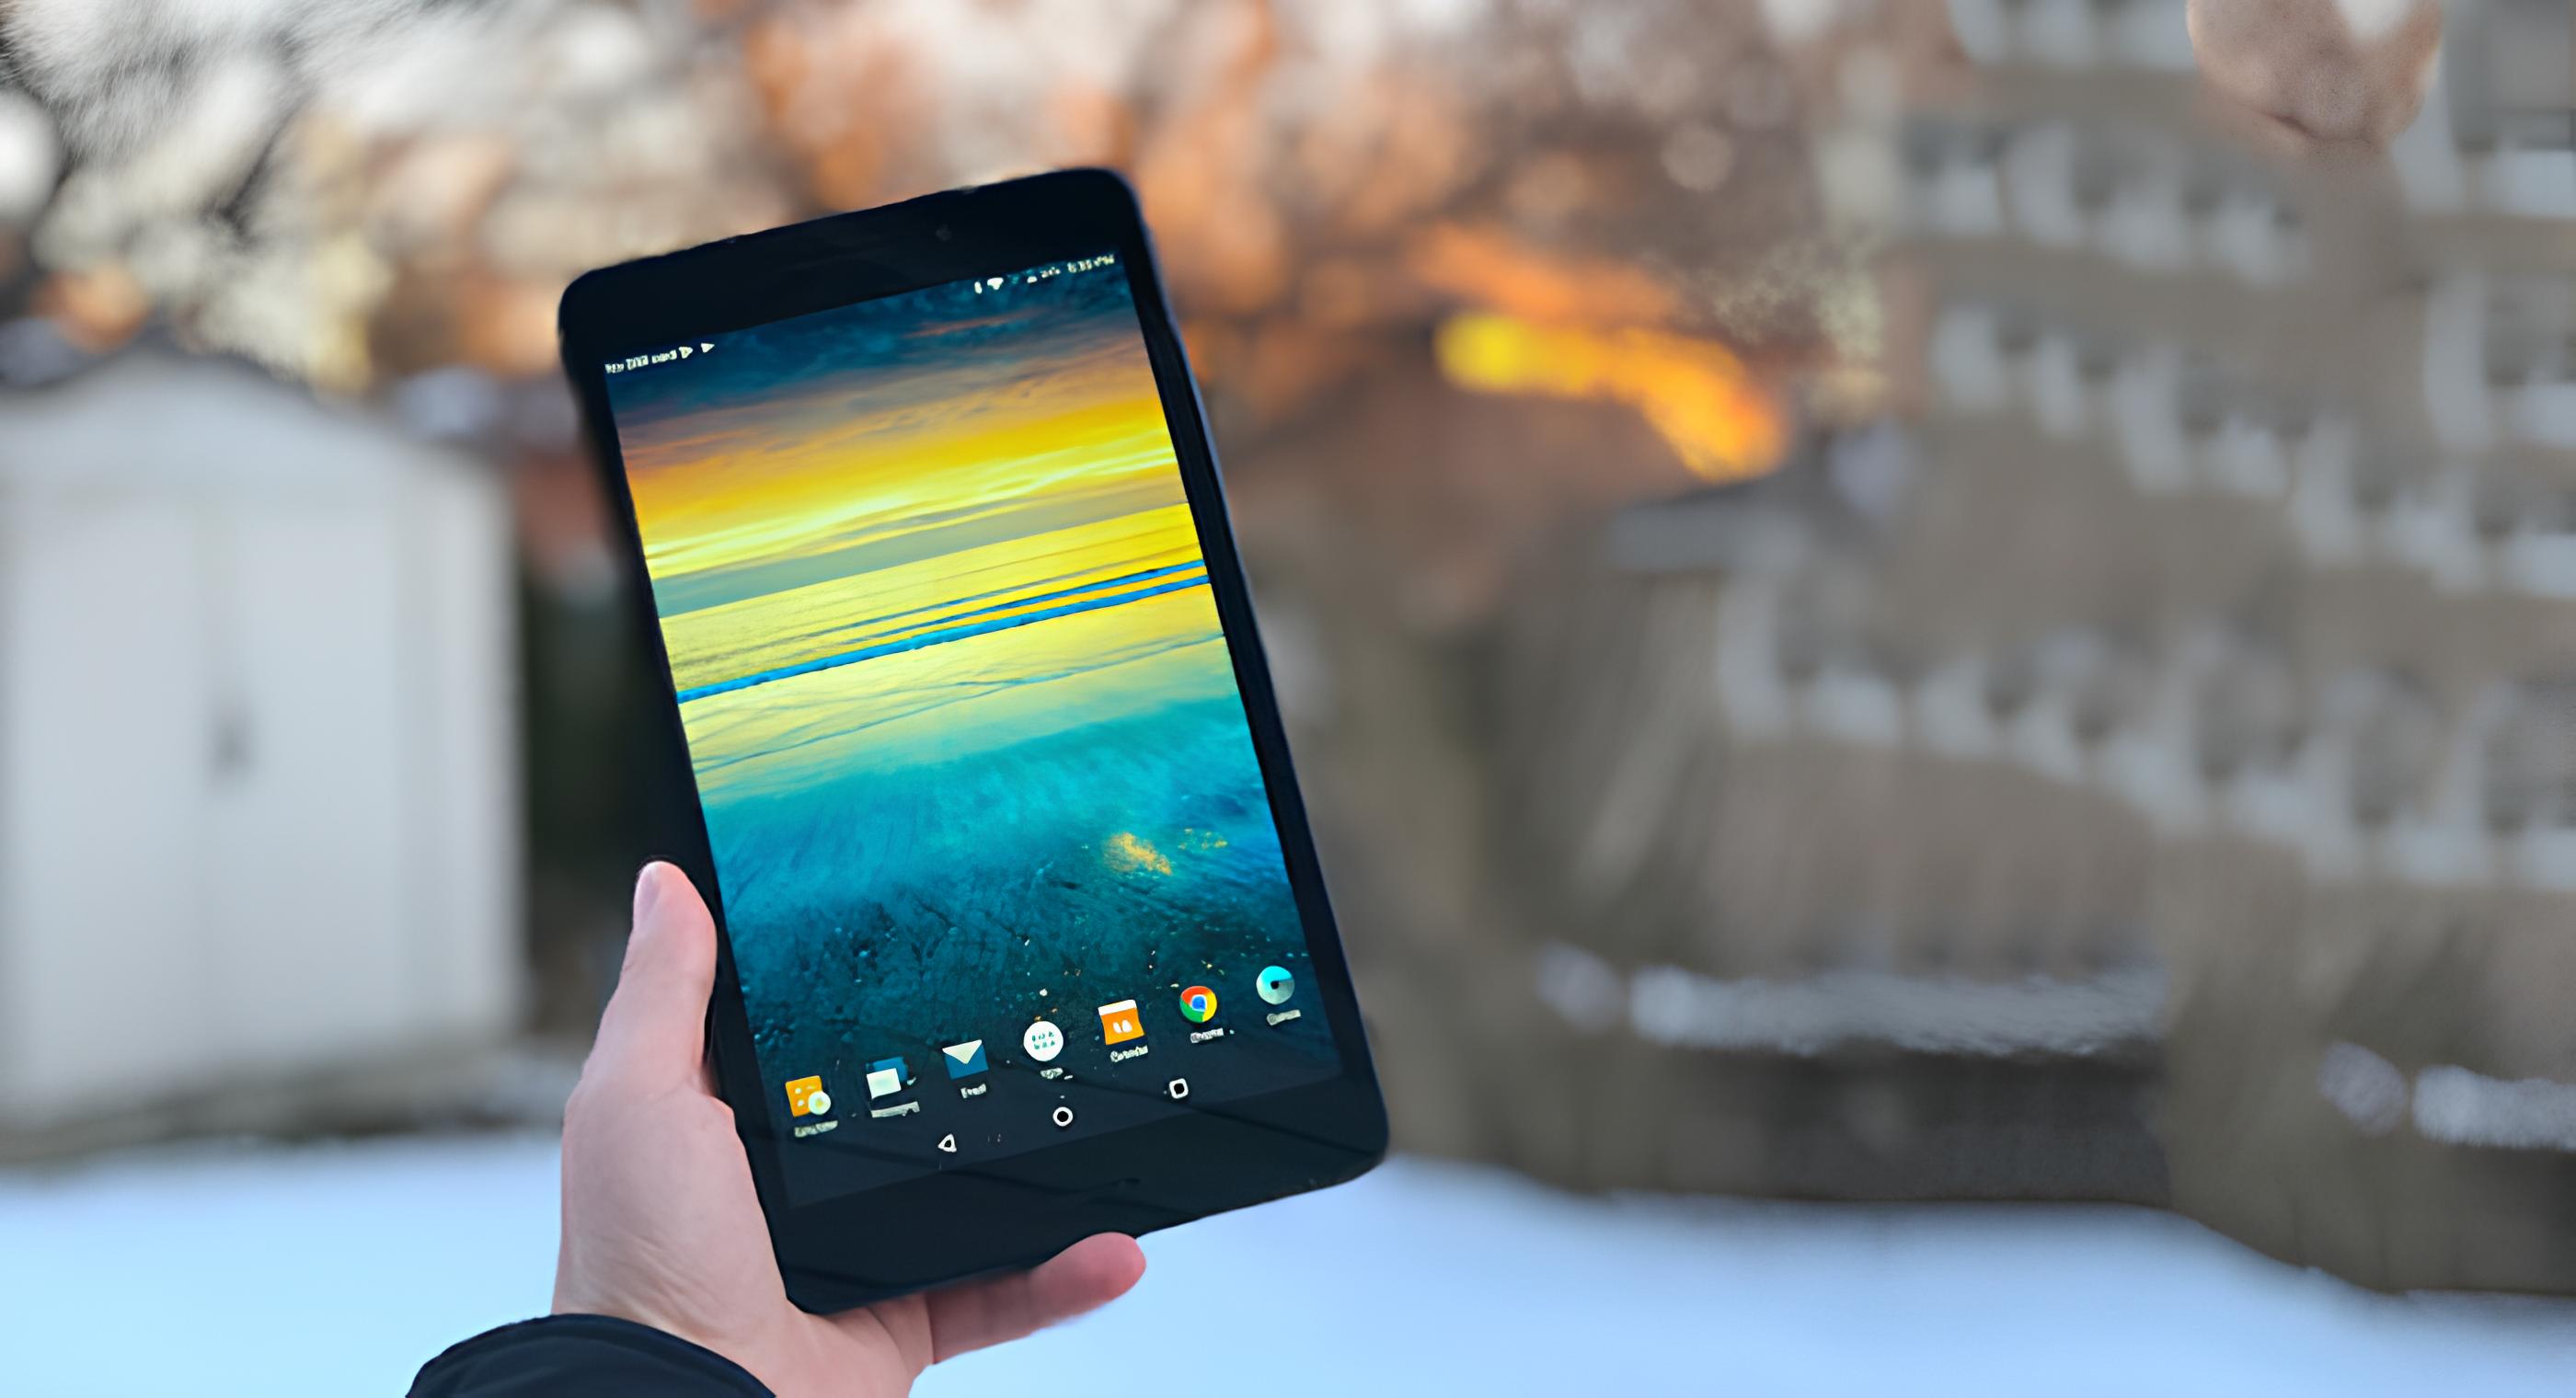 How To Reset A Zte Tablet Without Password